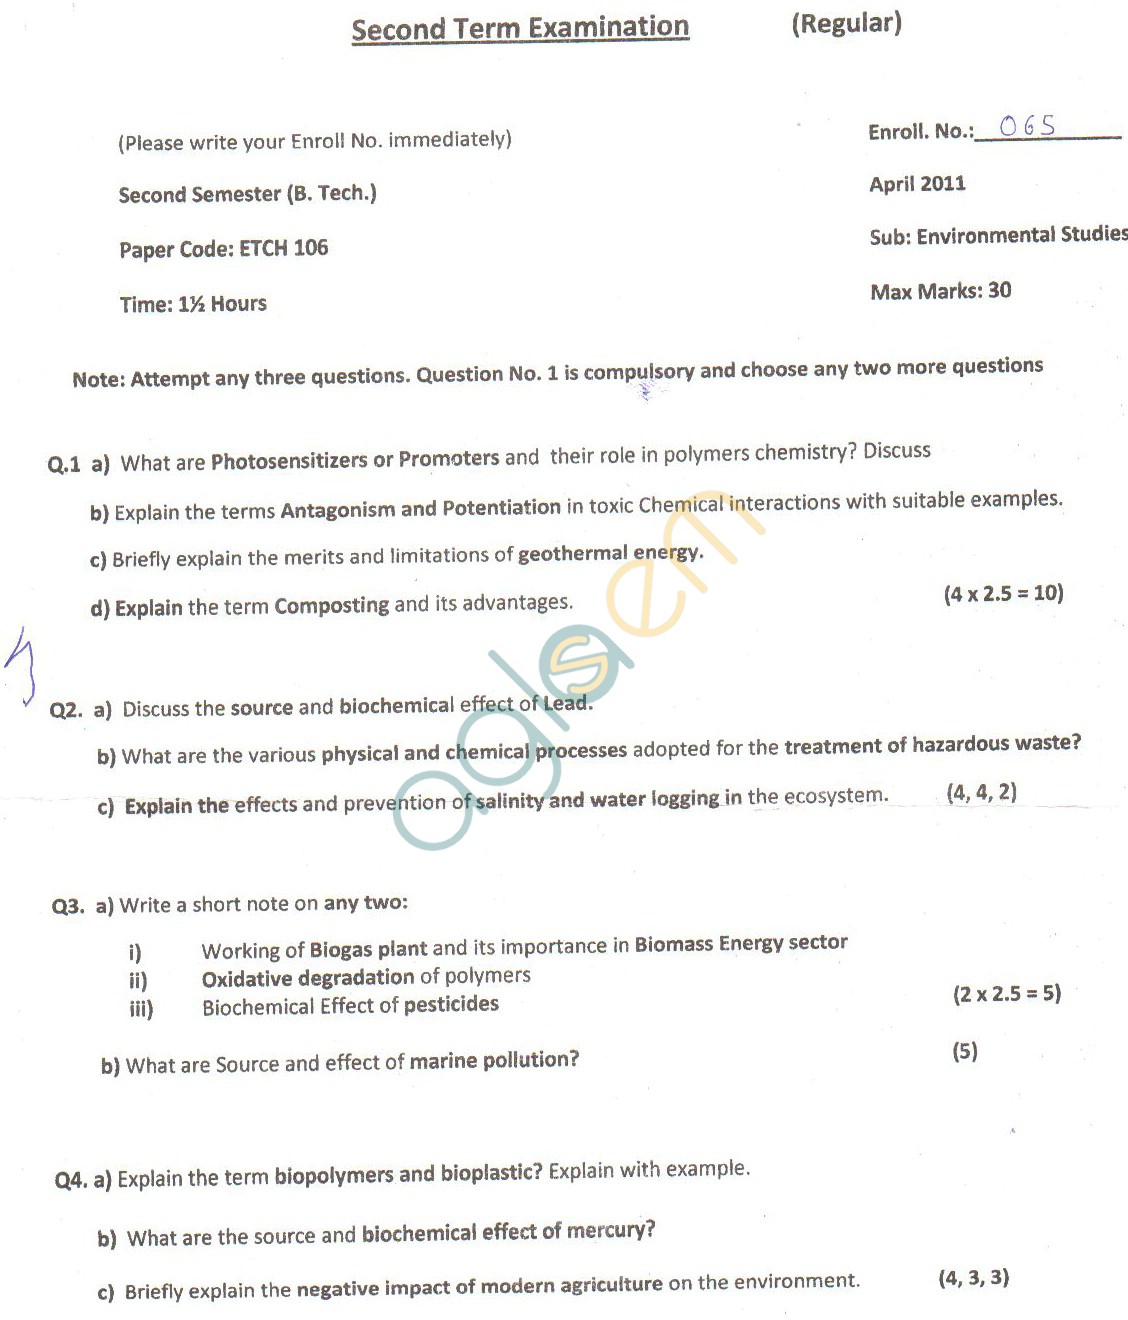 GGSIPU Question Papers Second Semester  Second Term 2011  ETCH-106